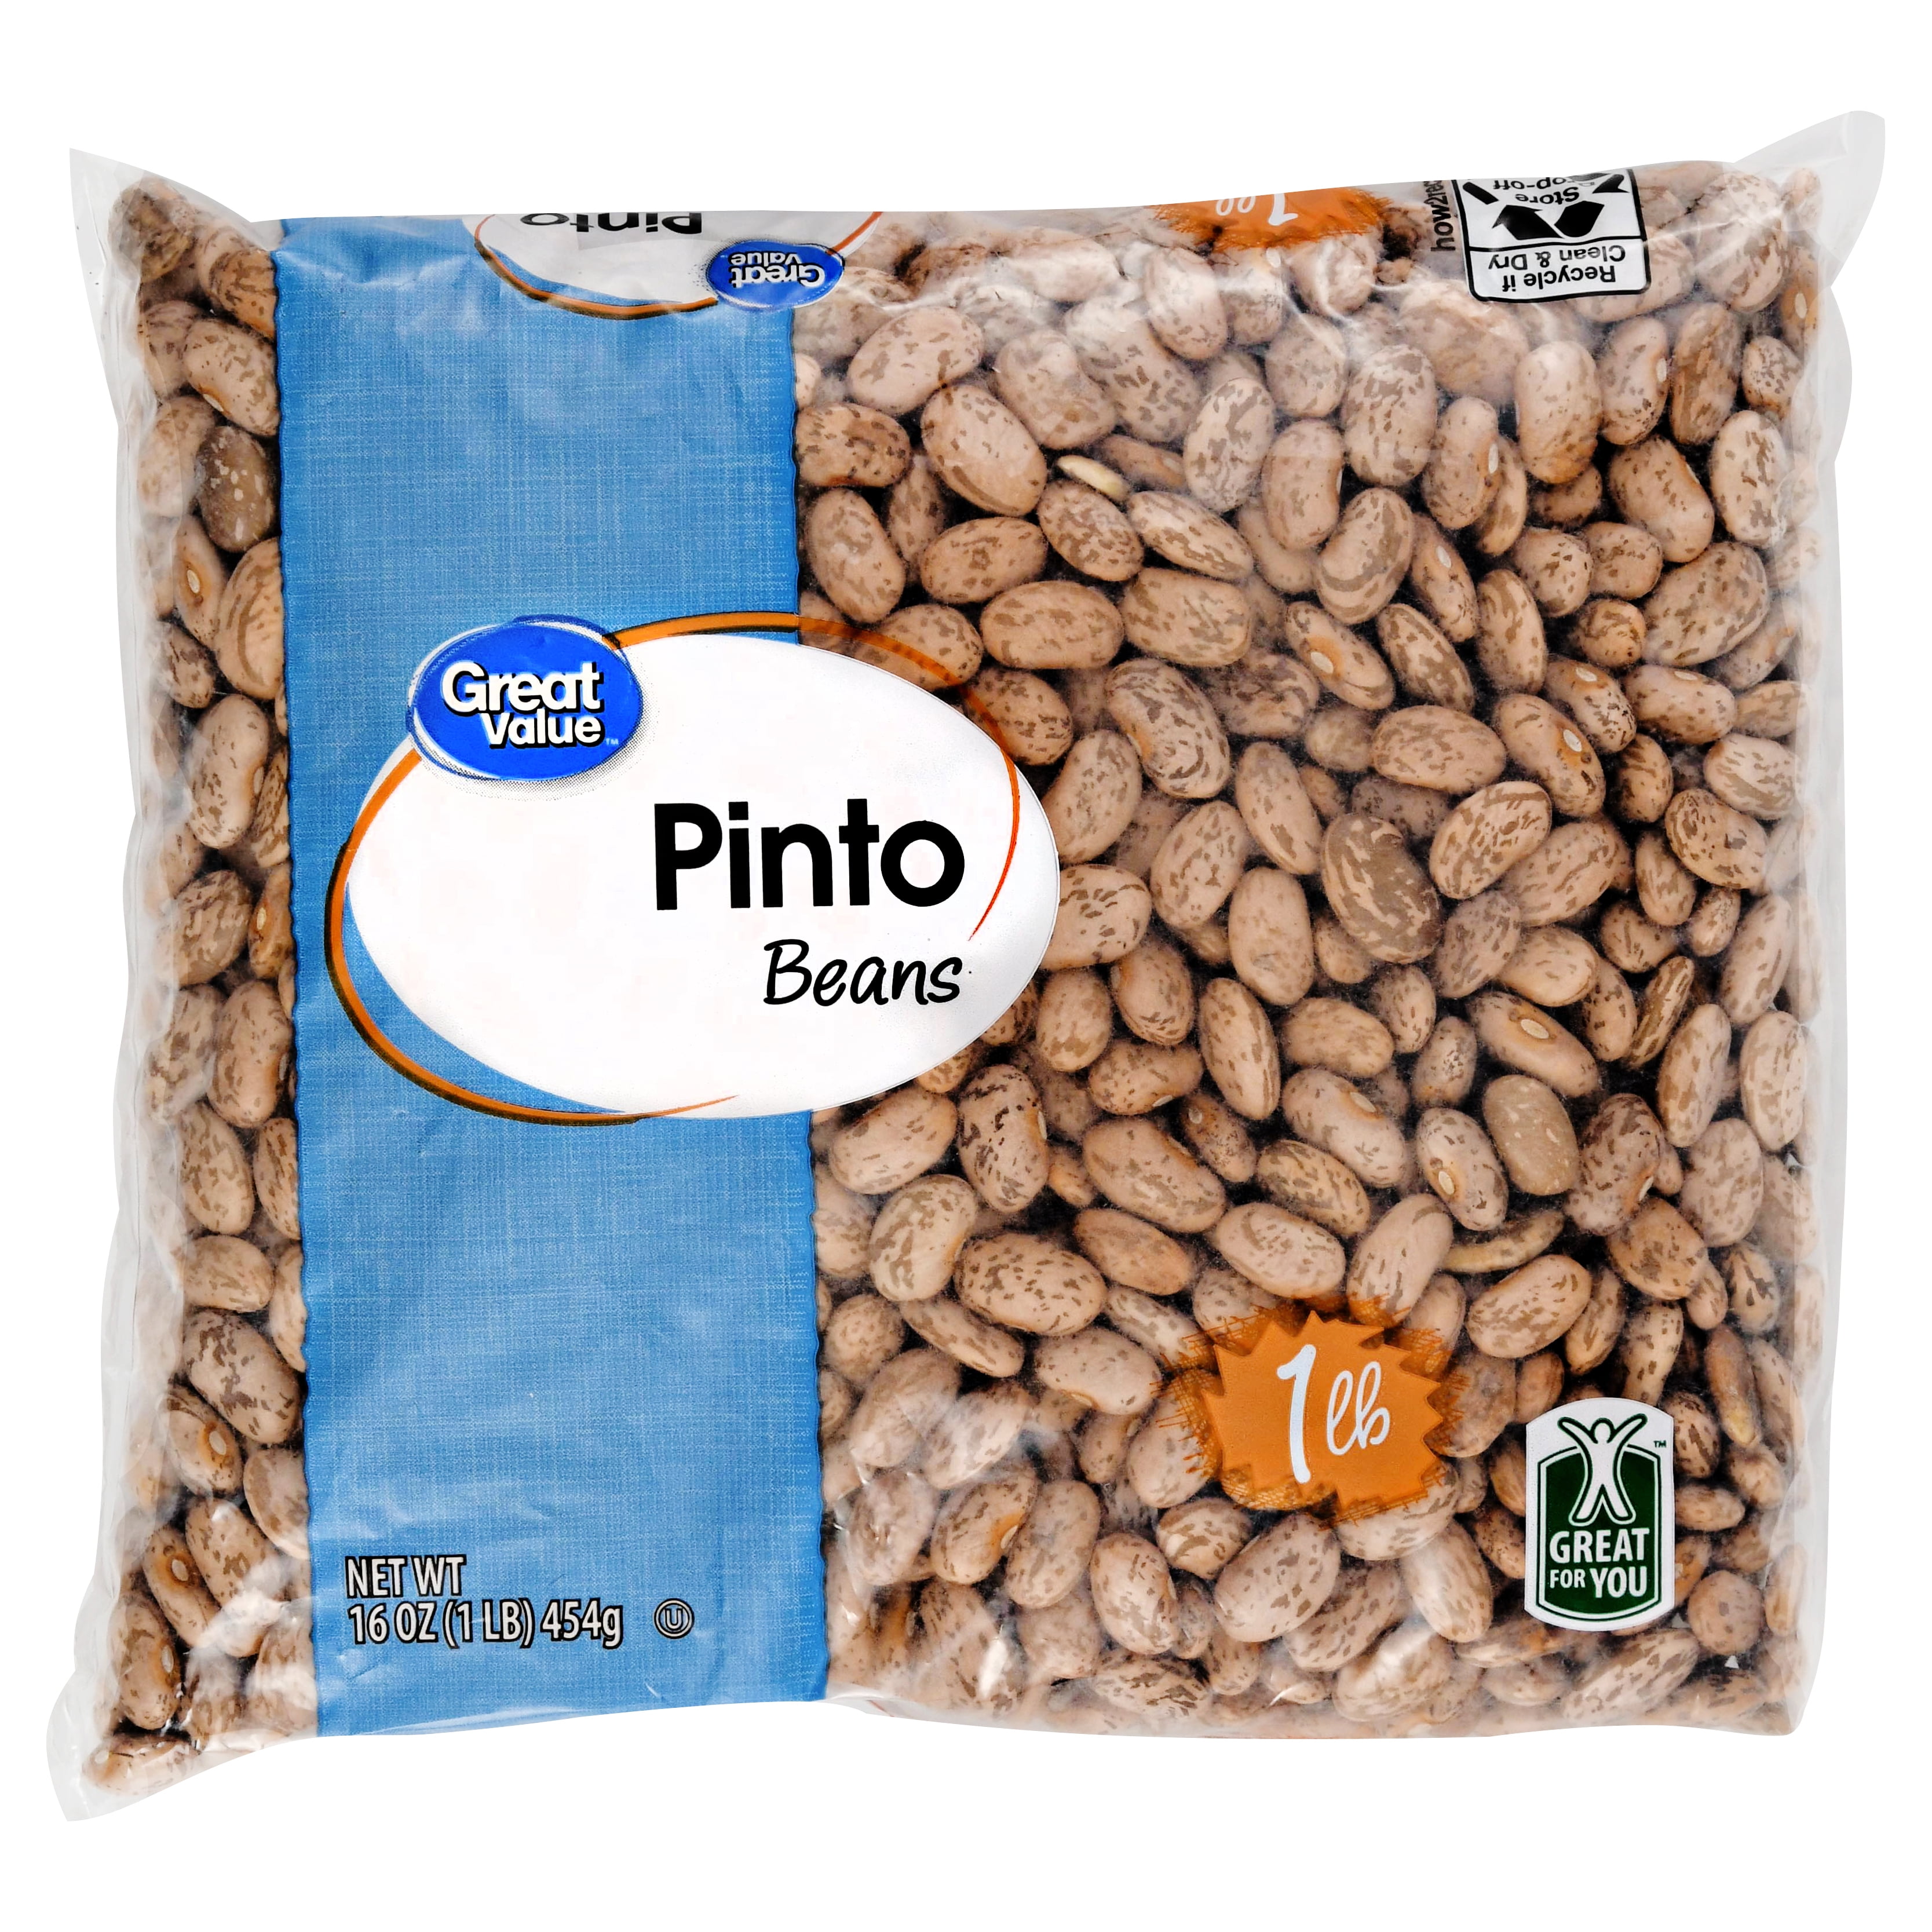 Bush's Best Southwestern Style Pinto Beans (15.4 oz) from Food Lion